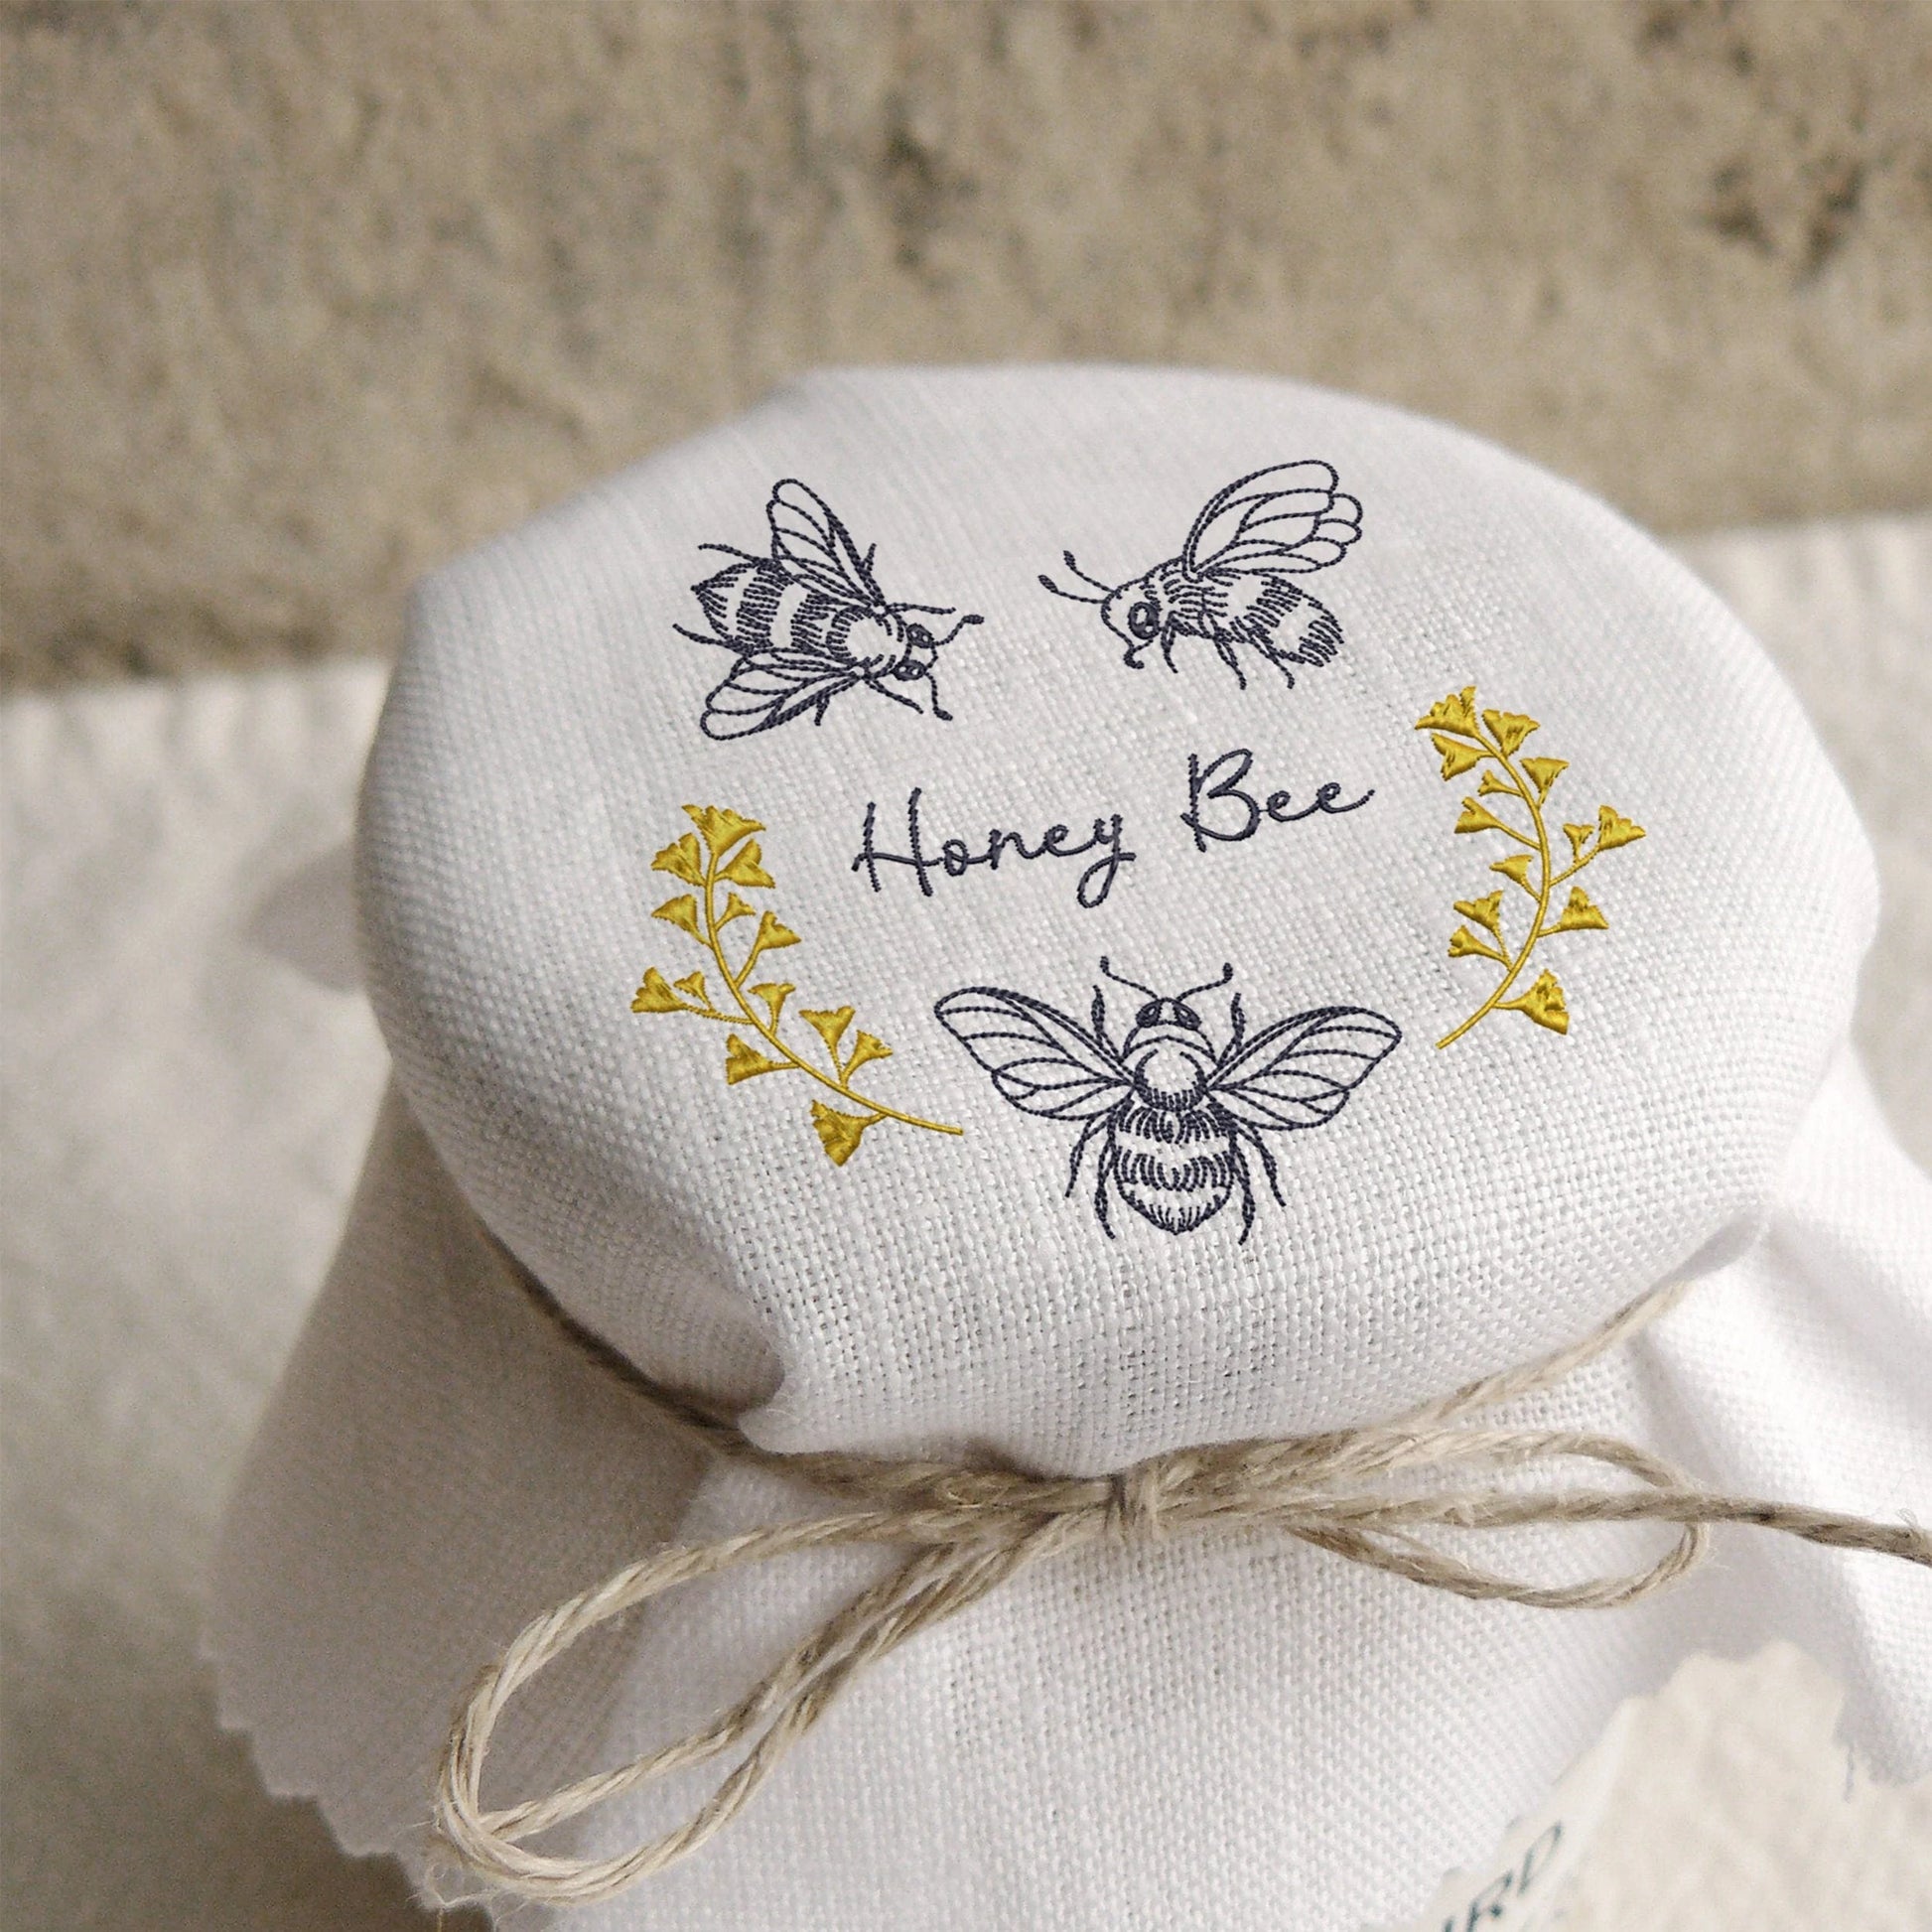 Honey Bee Machine Embroidery Design on a jam jar cover